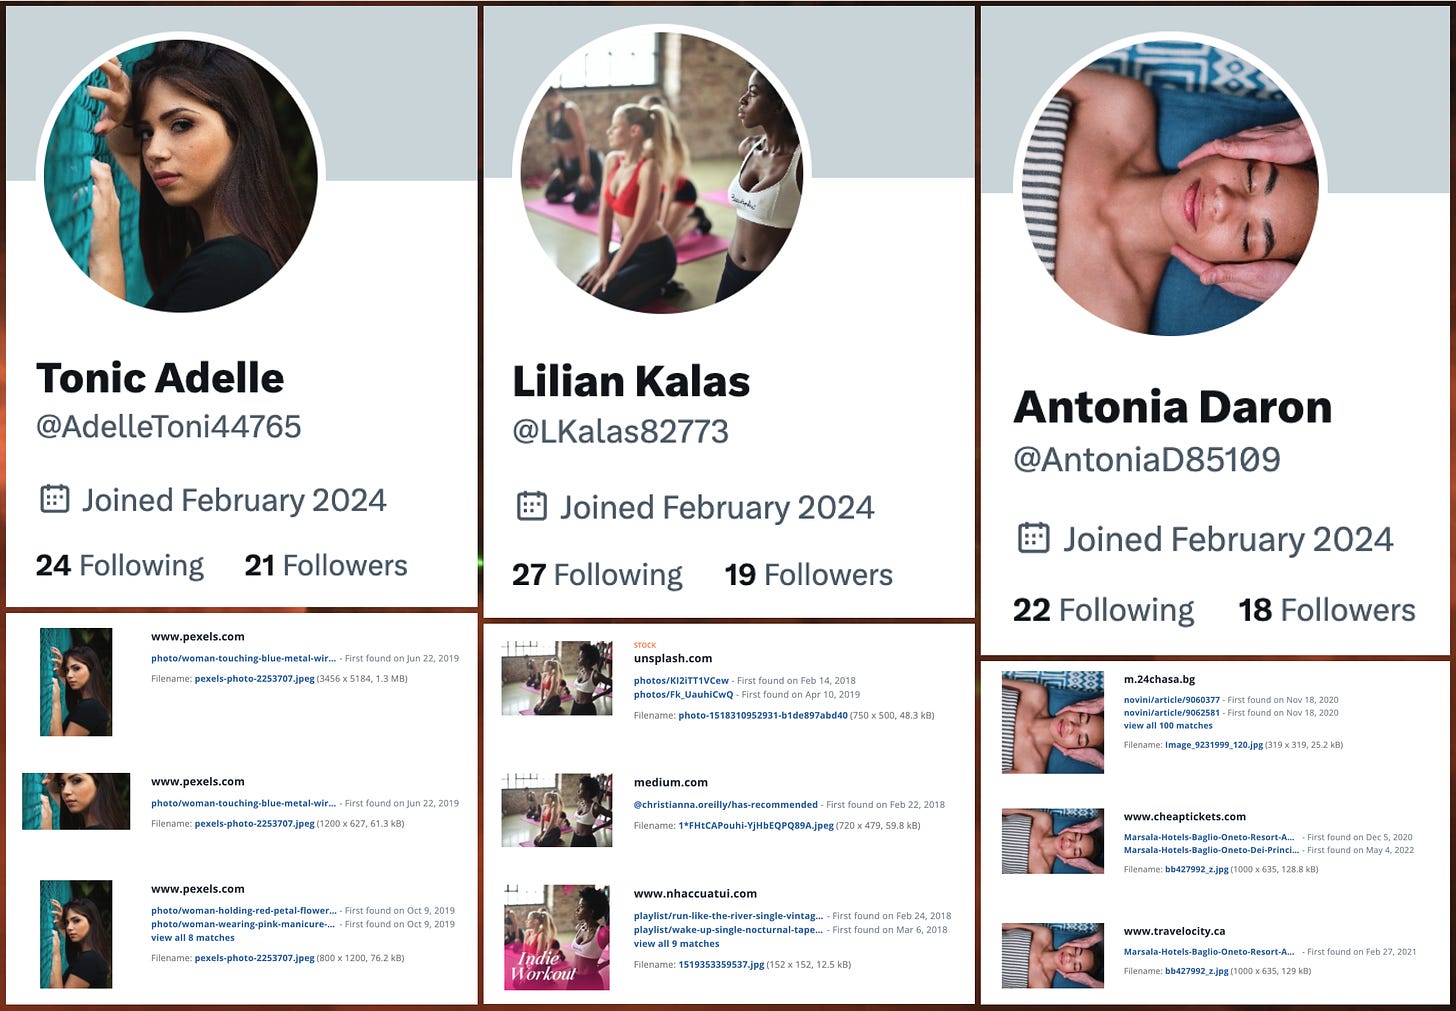 screenshots of the profiles of three of the spam accounts and reverse image searches demonstrating that their profile photos are plagiarized